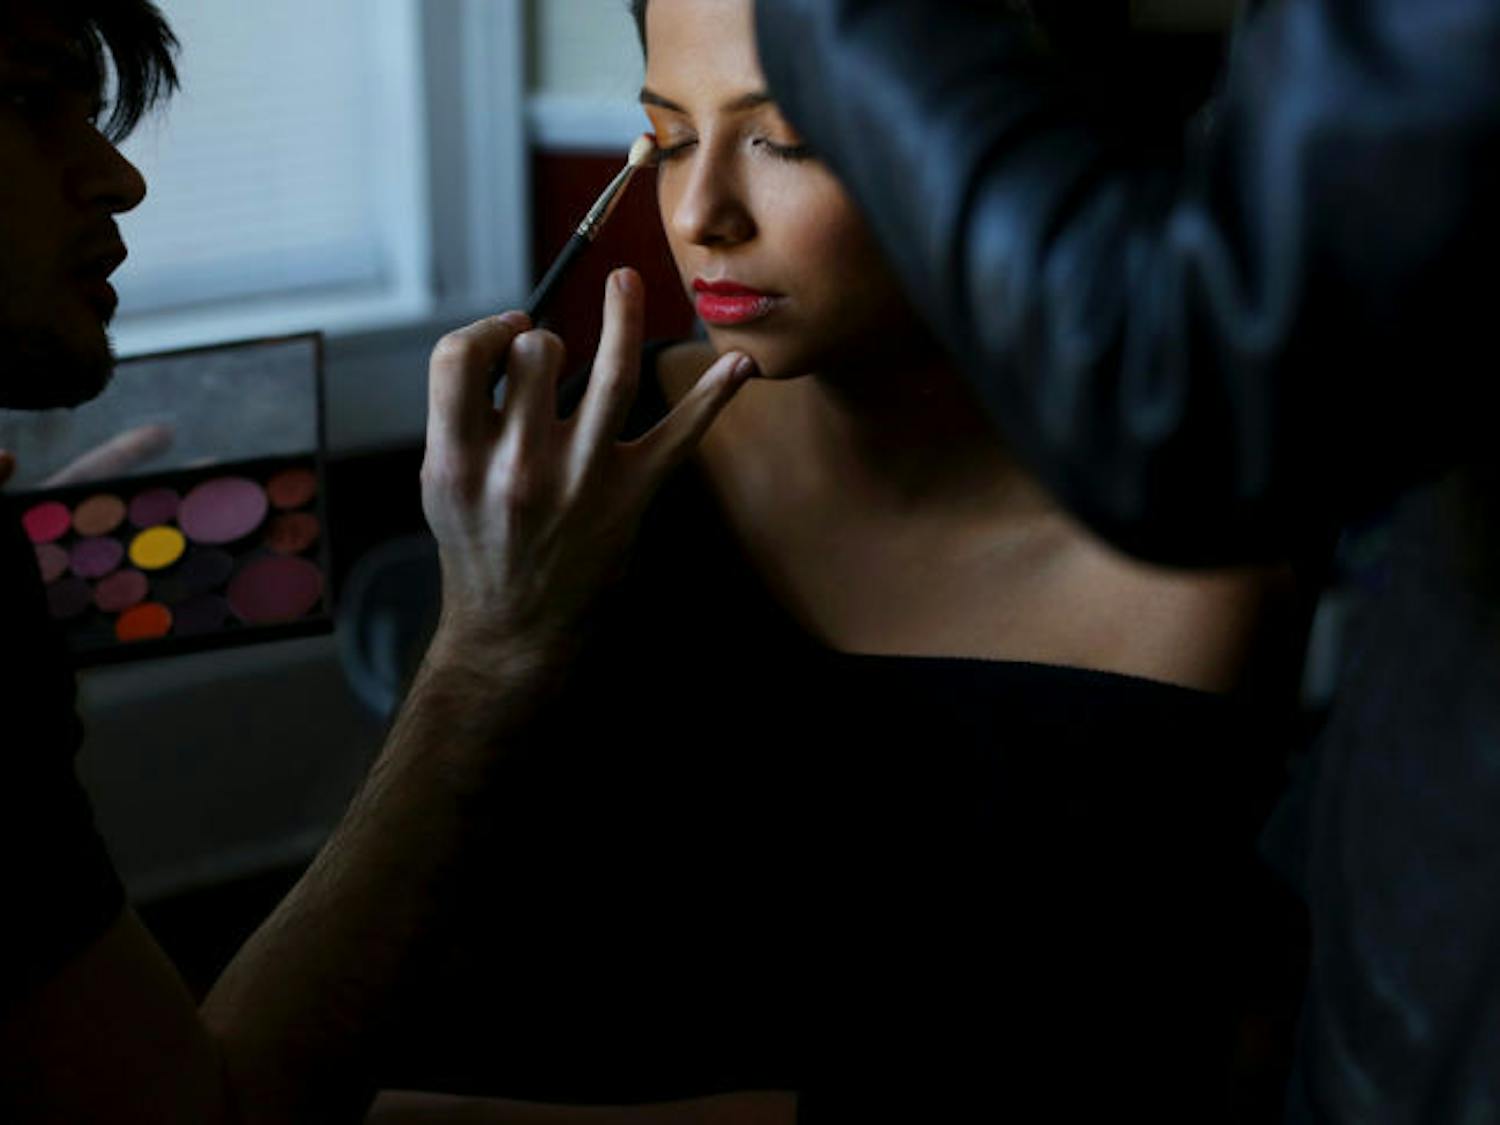 Gainesville Fashion Week model Tamima Mehrotra sits through hair and makeup before an early-season editorial photo shoot last month. Hair: Nicole Collazo. Makeup: Niko Pifferetti